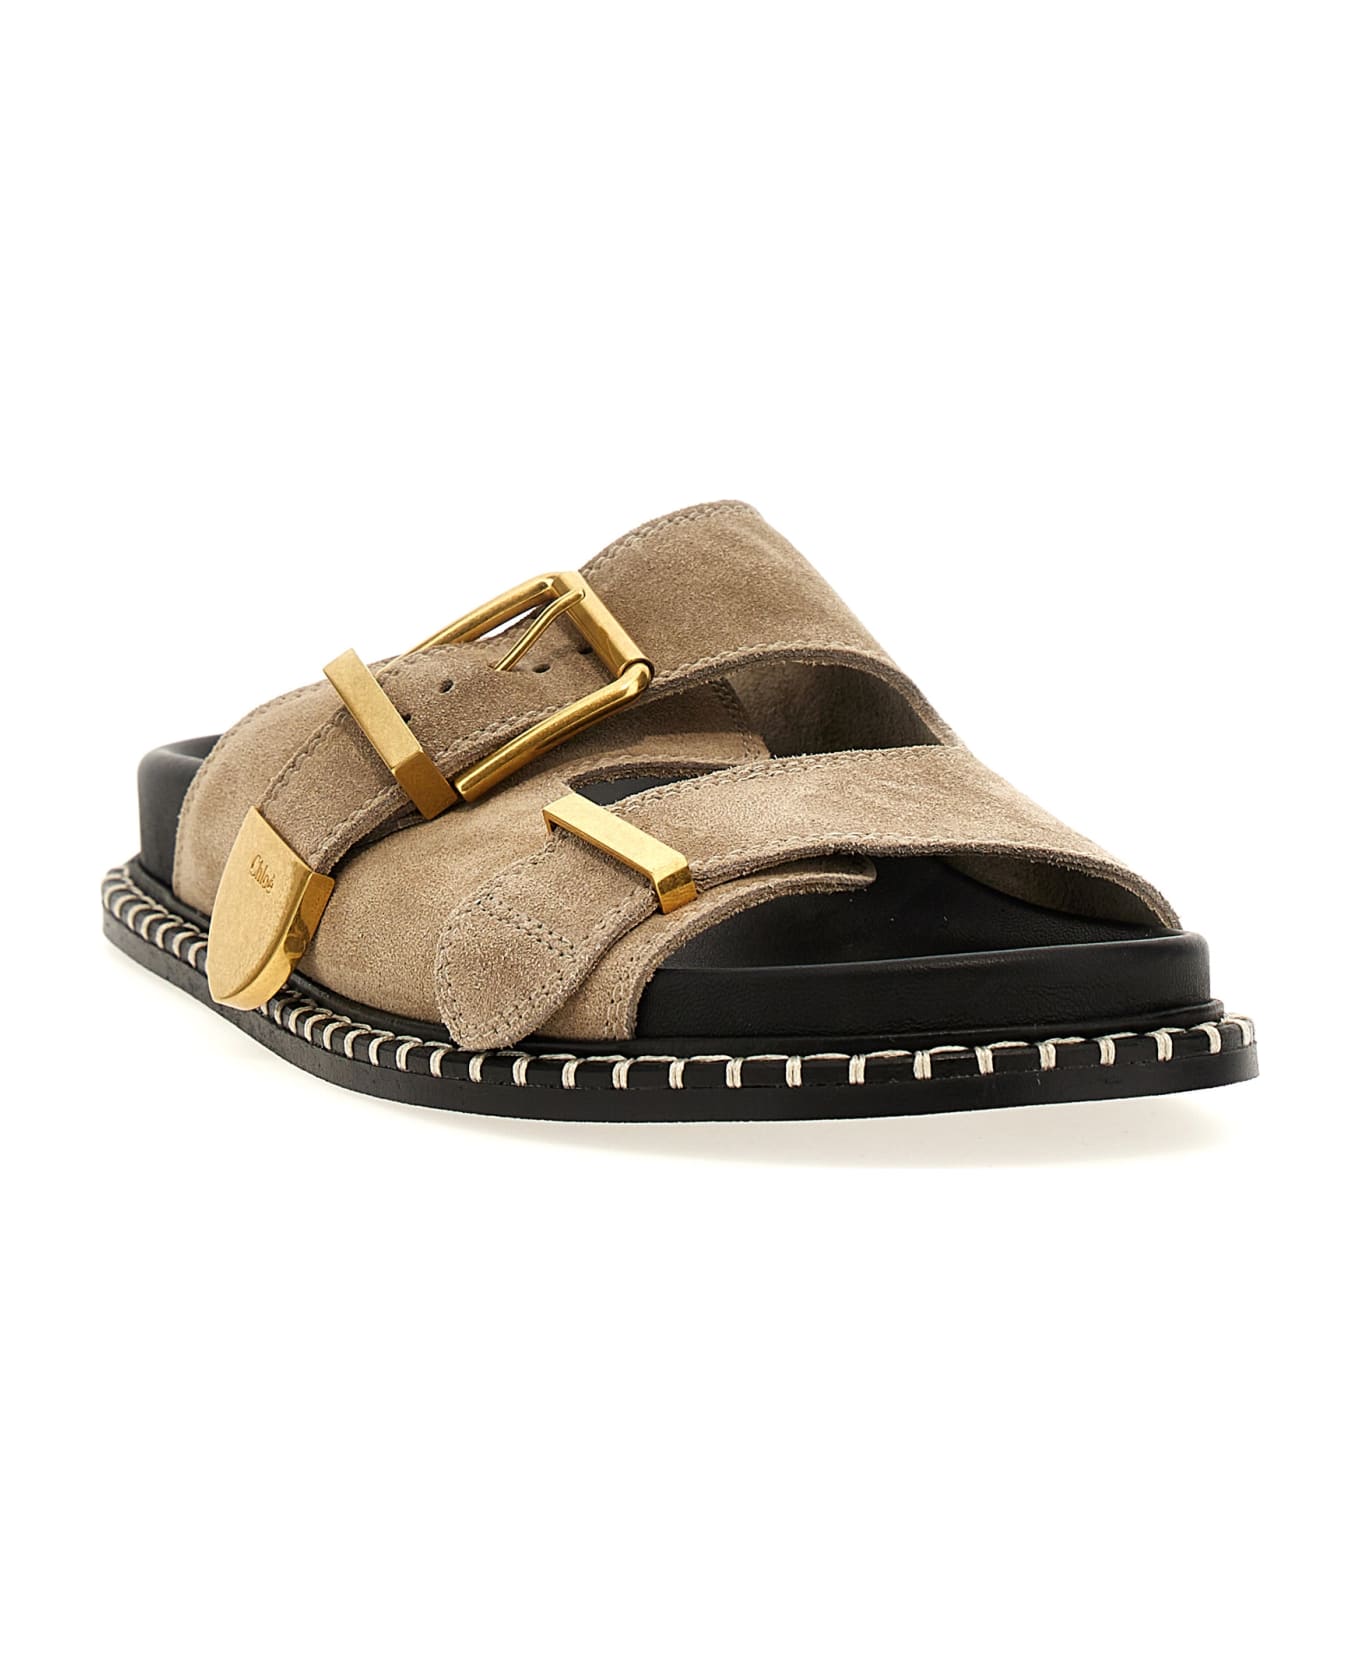 Chloé 'rebecca' Sandals - Check out detailed looks of the shoe below